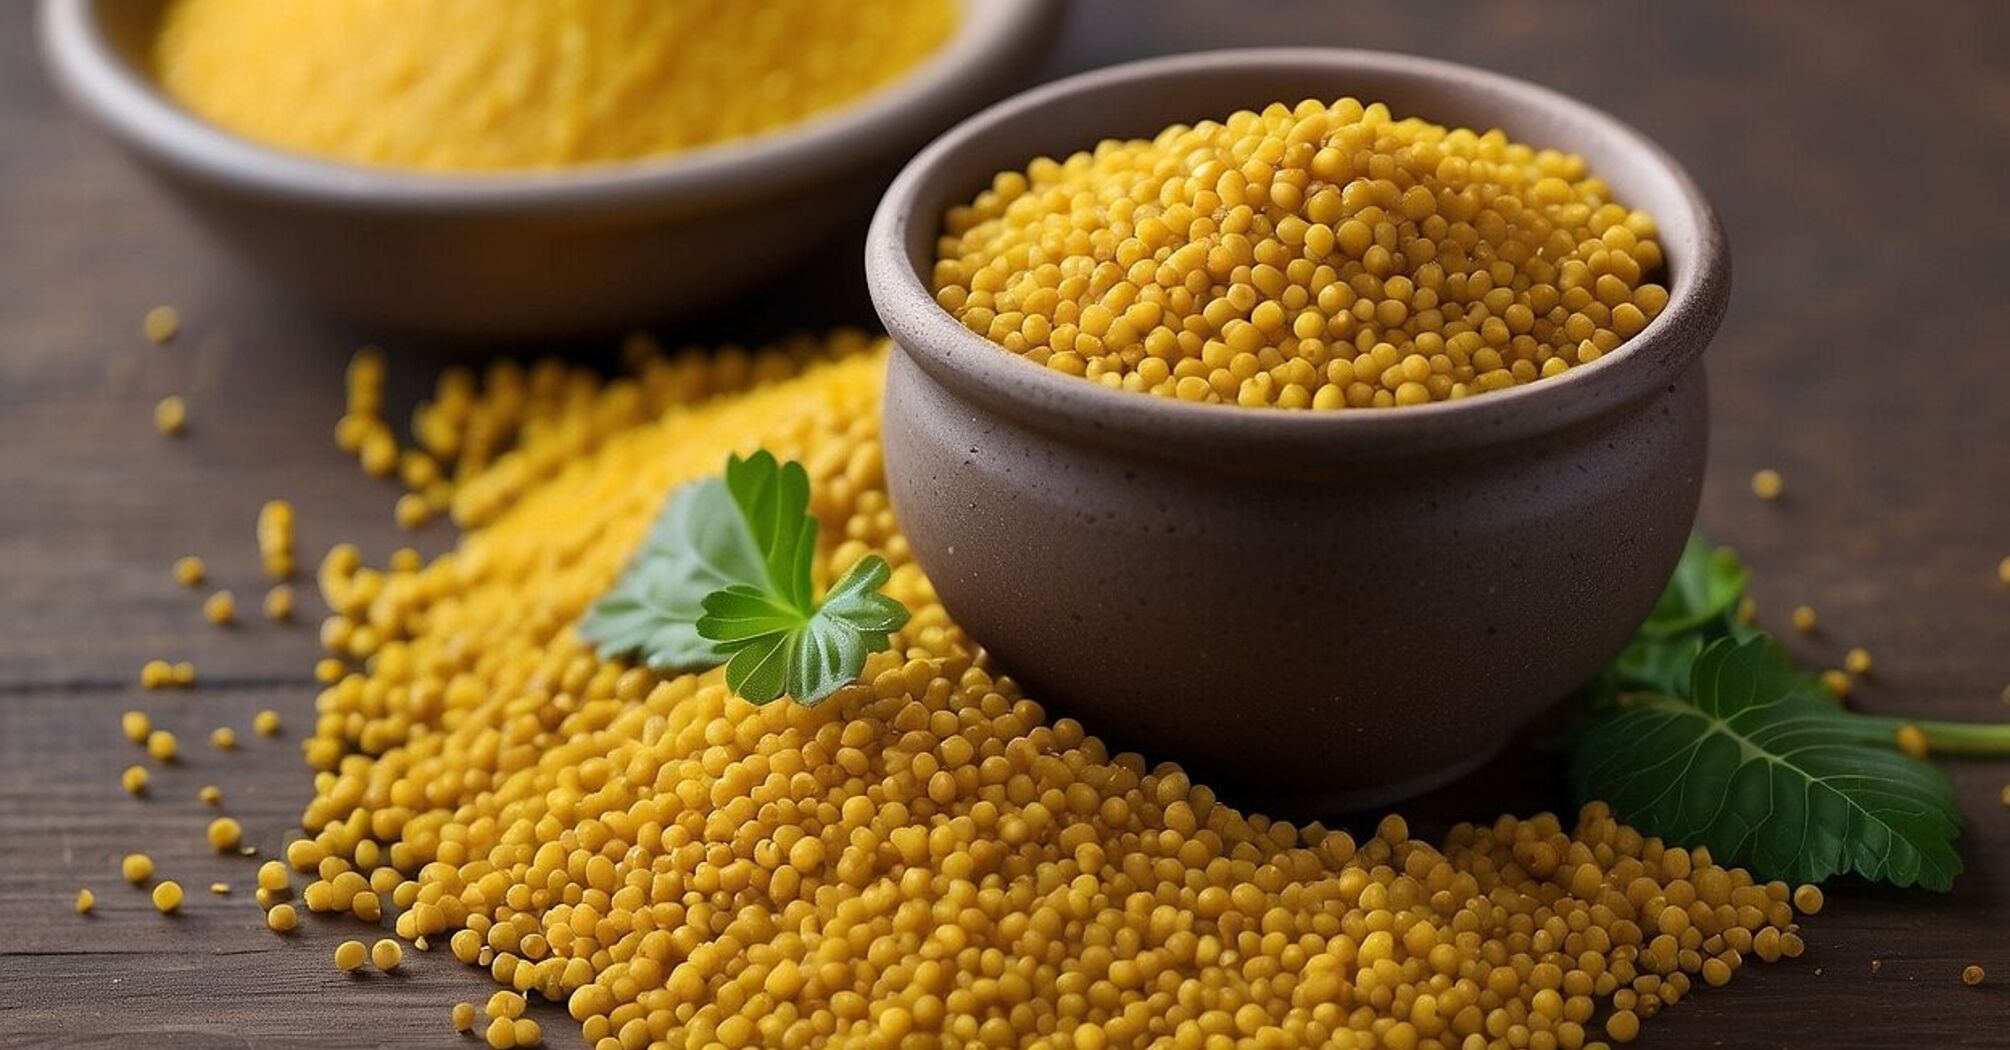 Mustard is very underestimated: what are the benefits and who is strictly prohibited